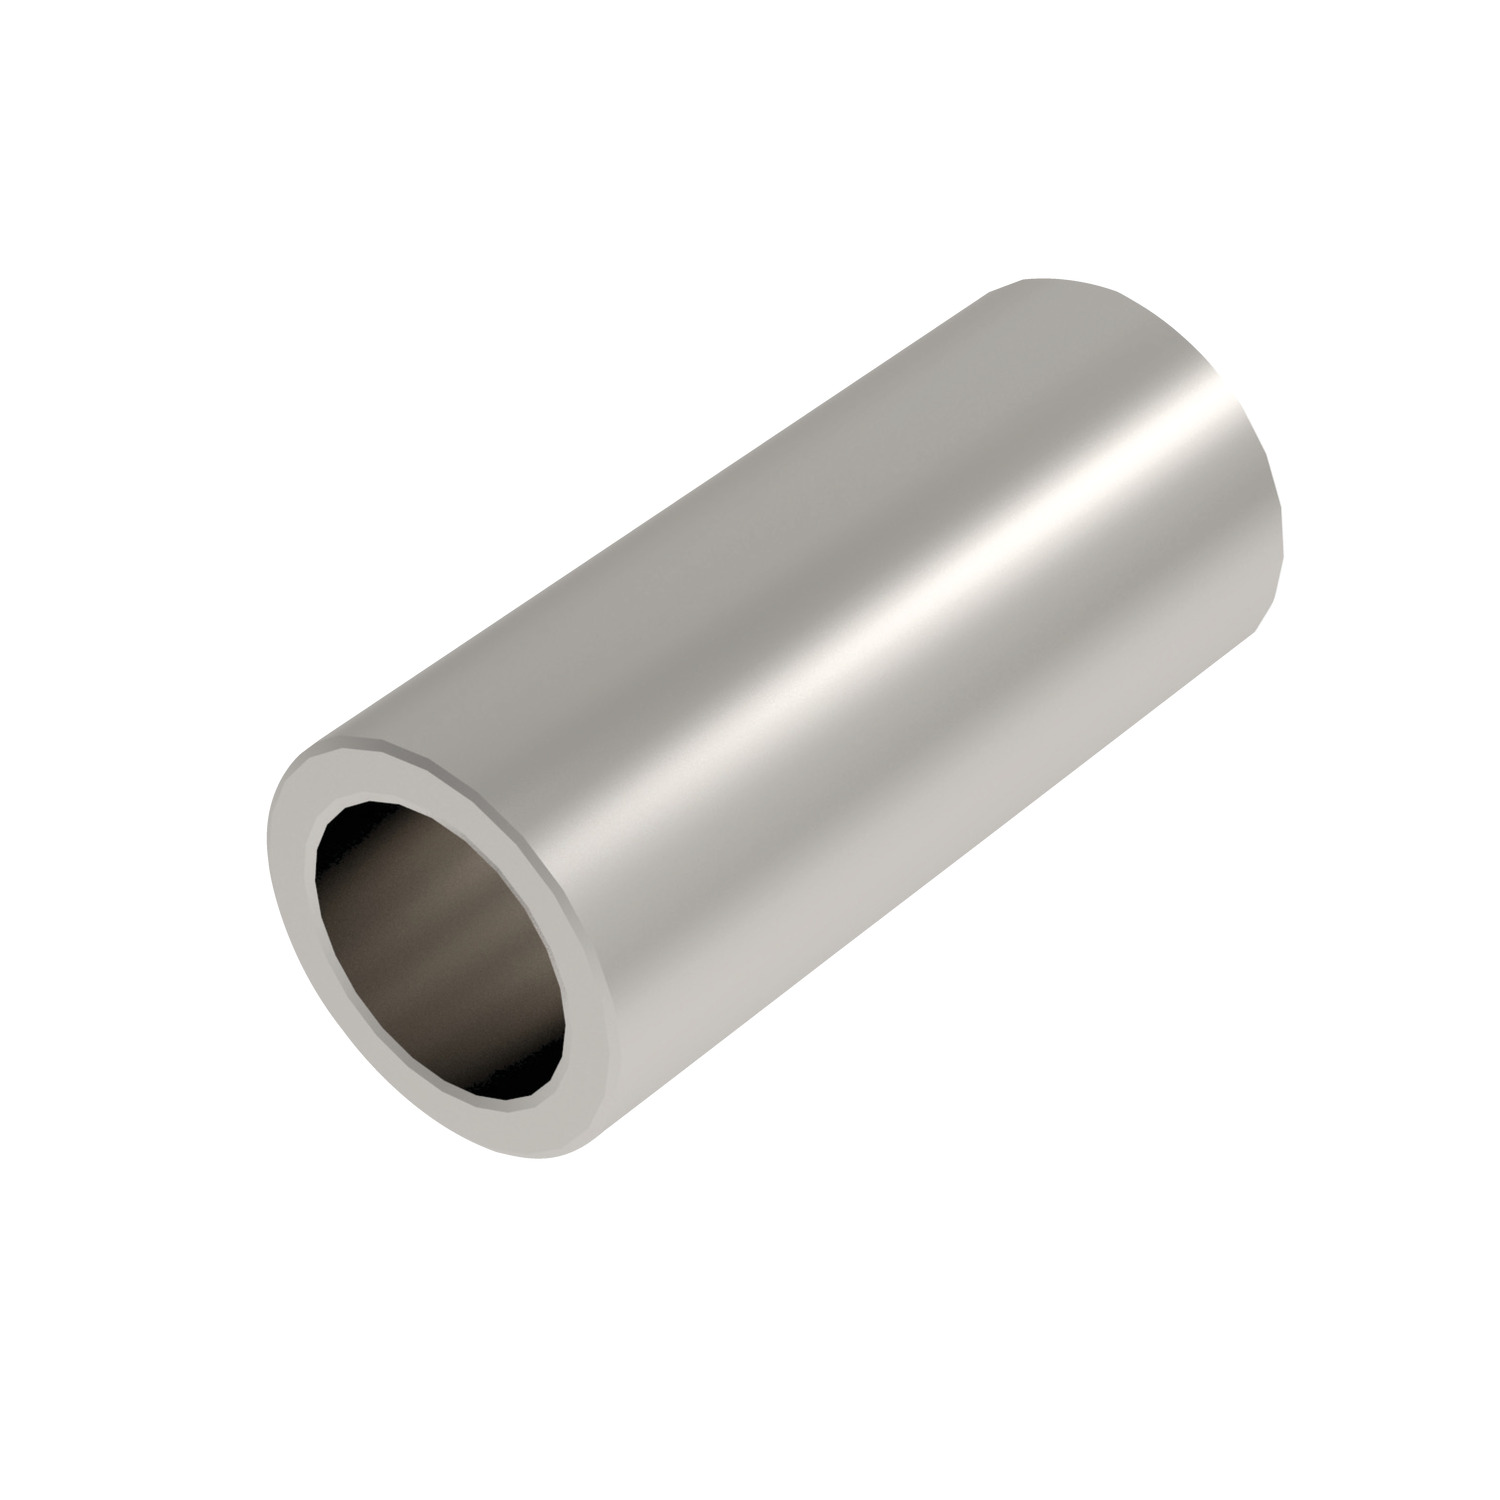 P1331 Cylindrical Spacers - Stainless